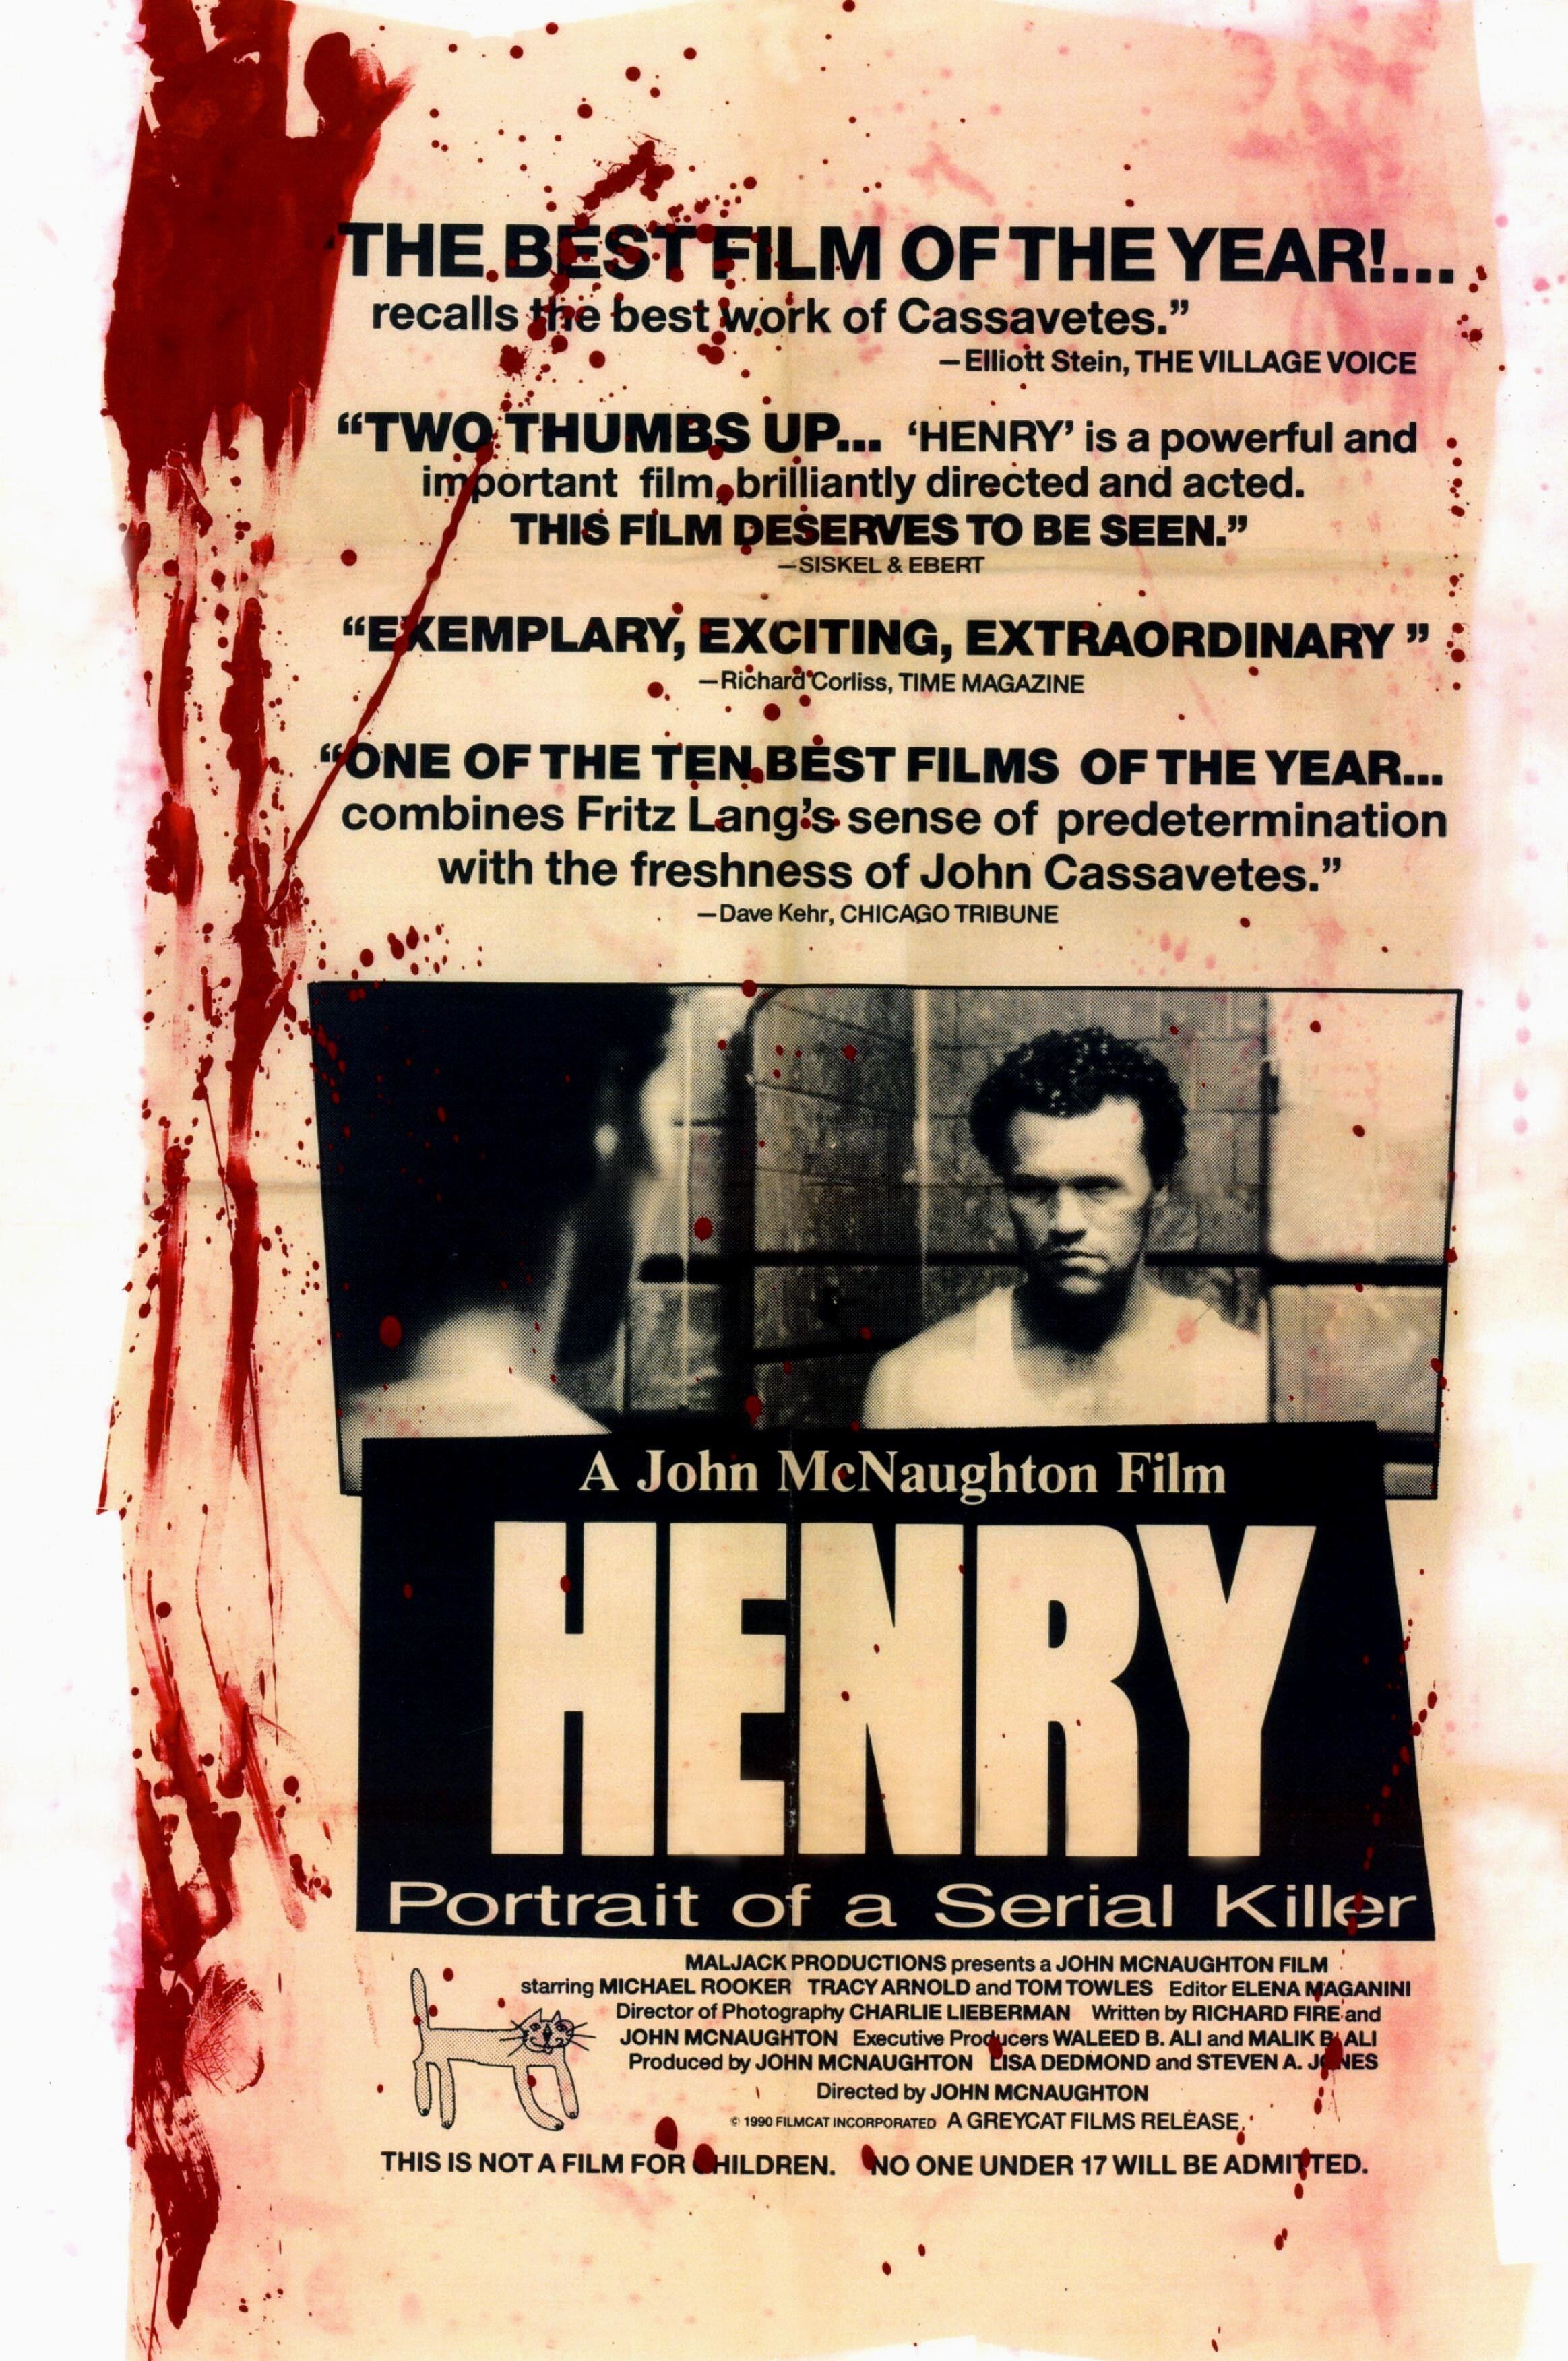 Poster image for the film &quot;Henry: Portrait of a Serial Killer&quot; showing Henry, portrayed by Michael Rooker, staring at himself in the mirror